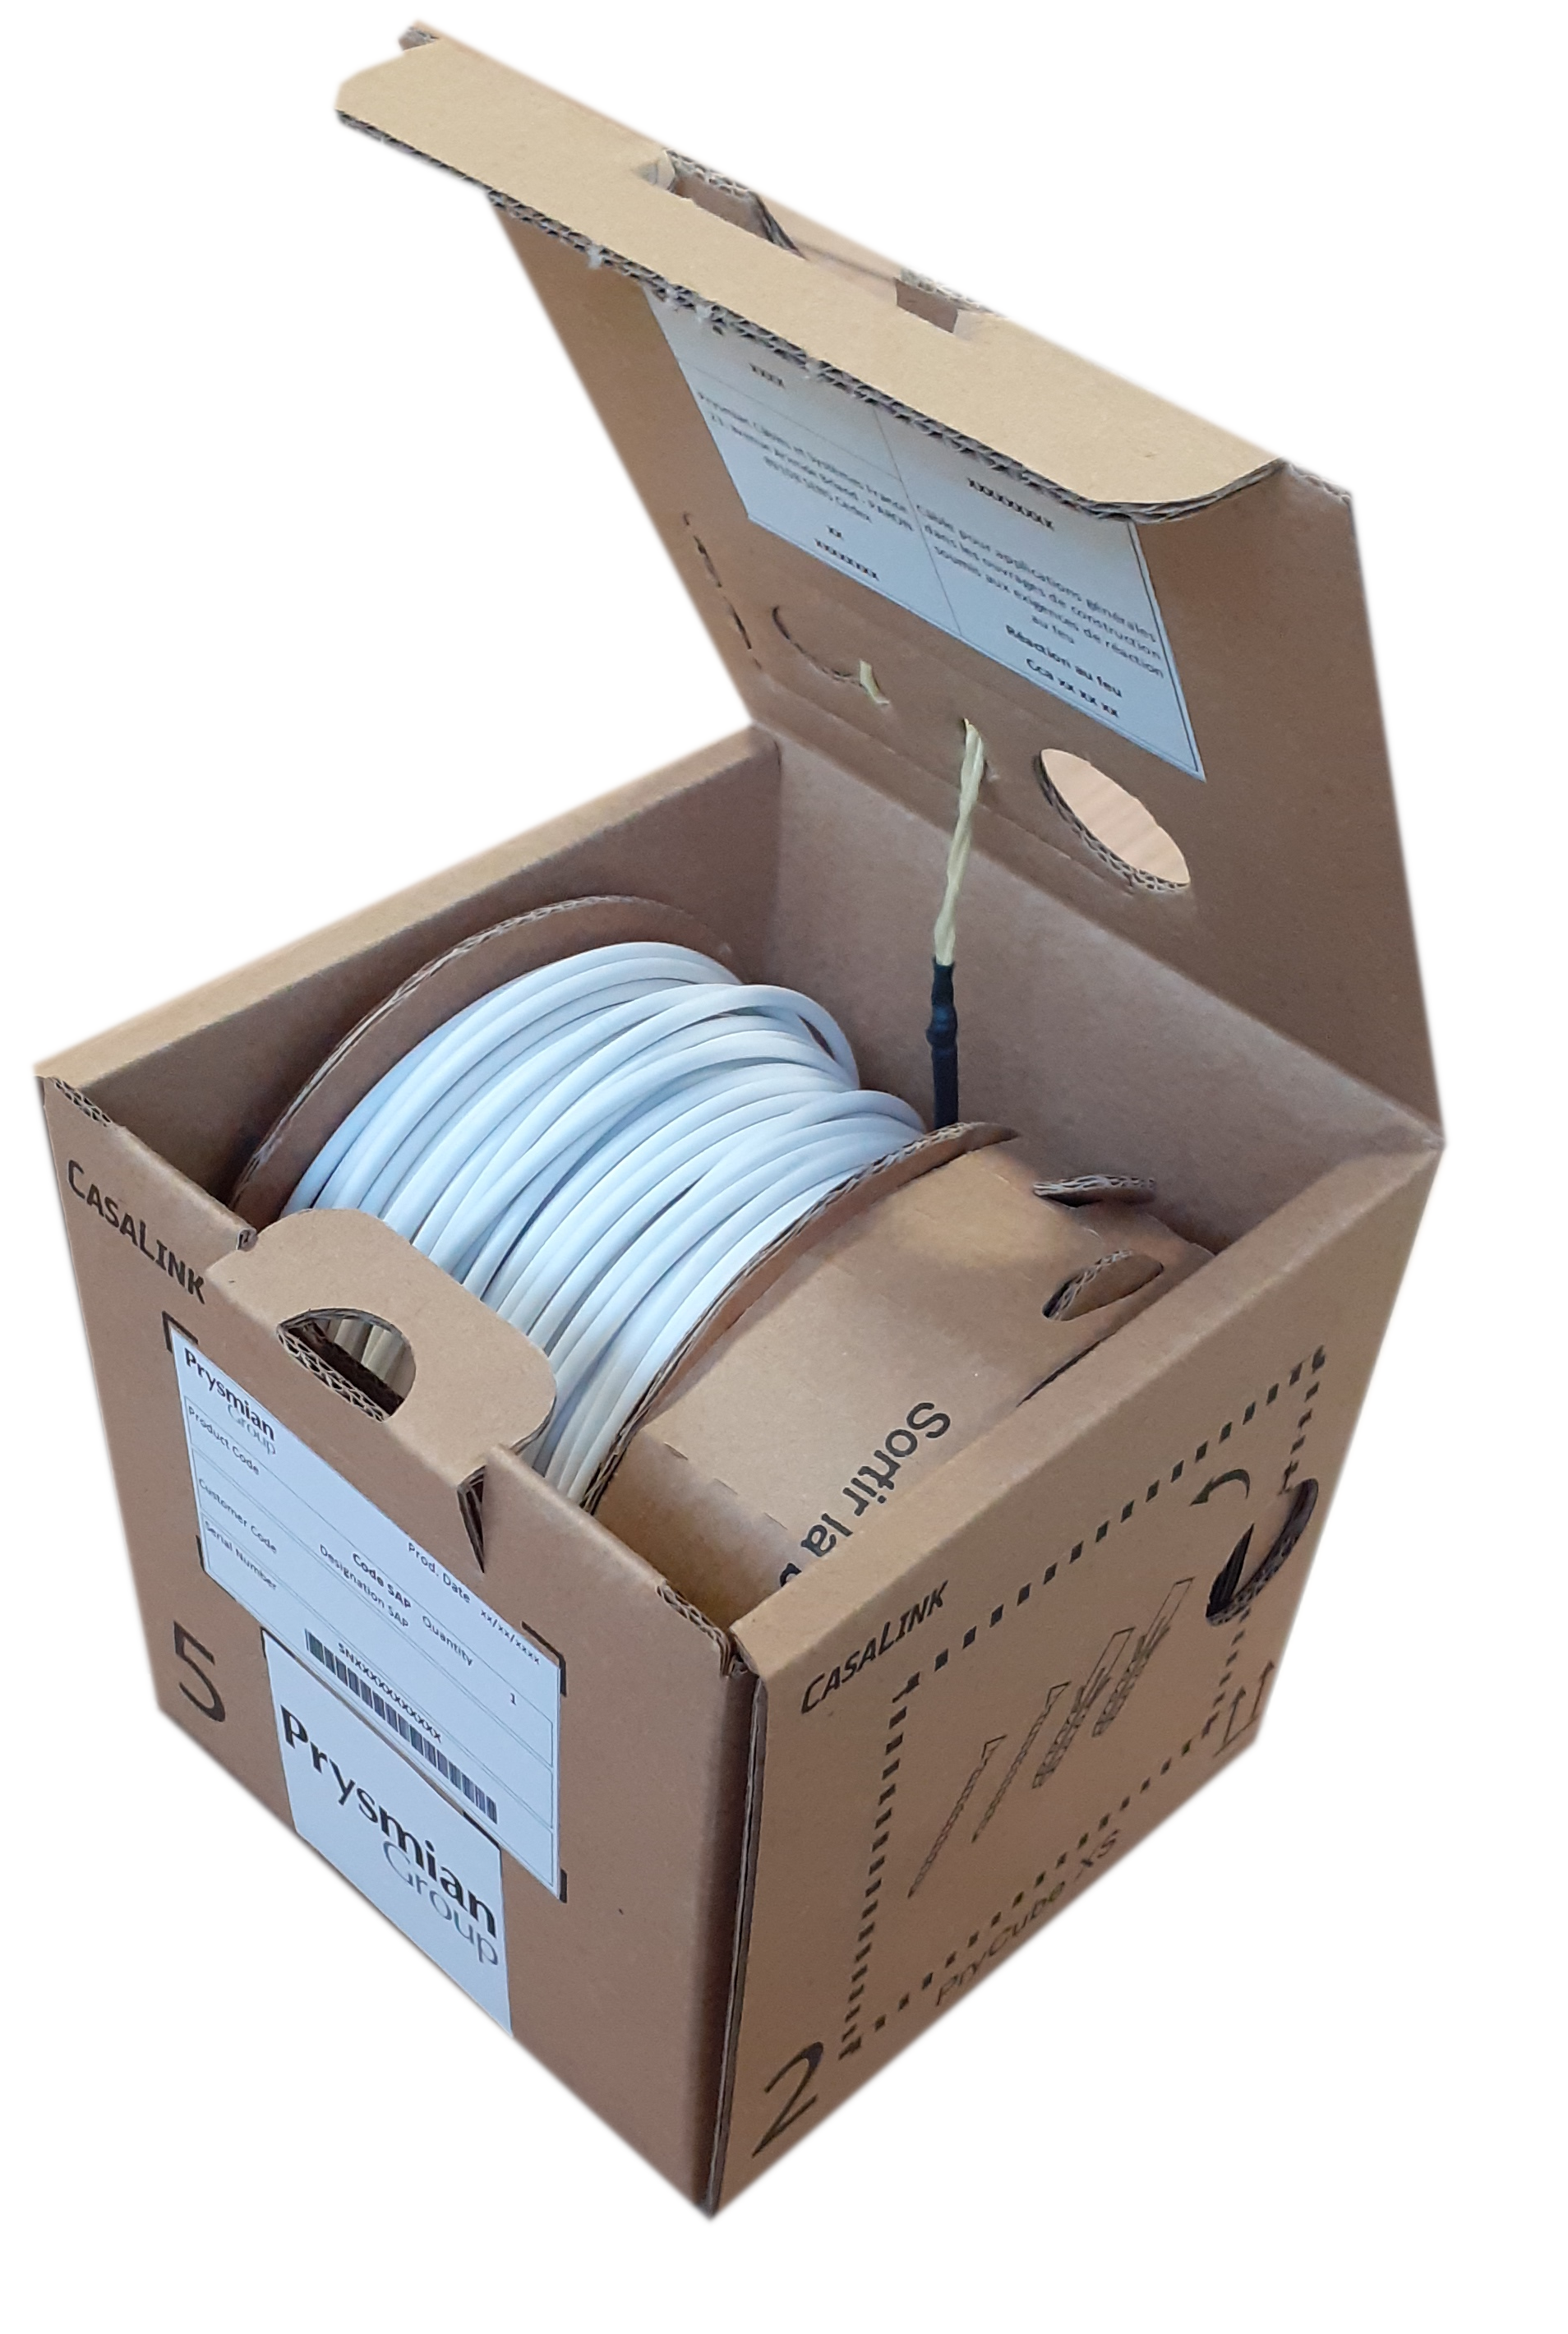 Kit PryCube XS kit for indoor cable